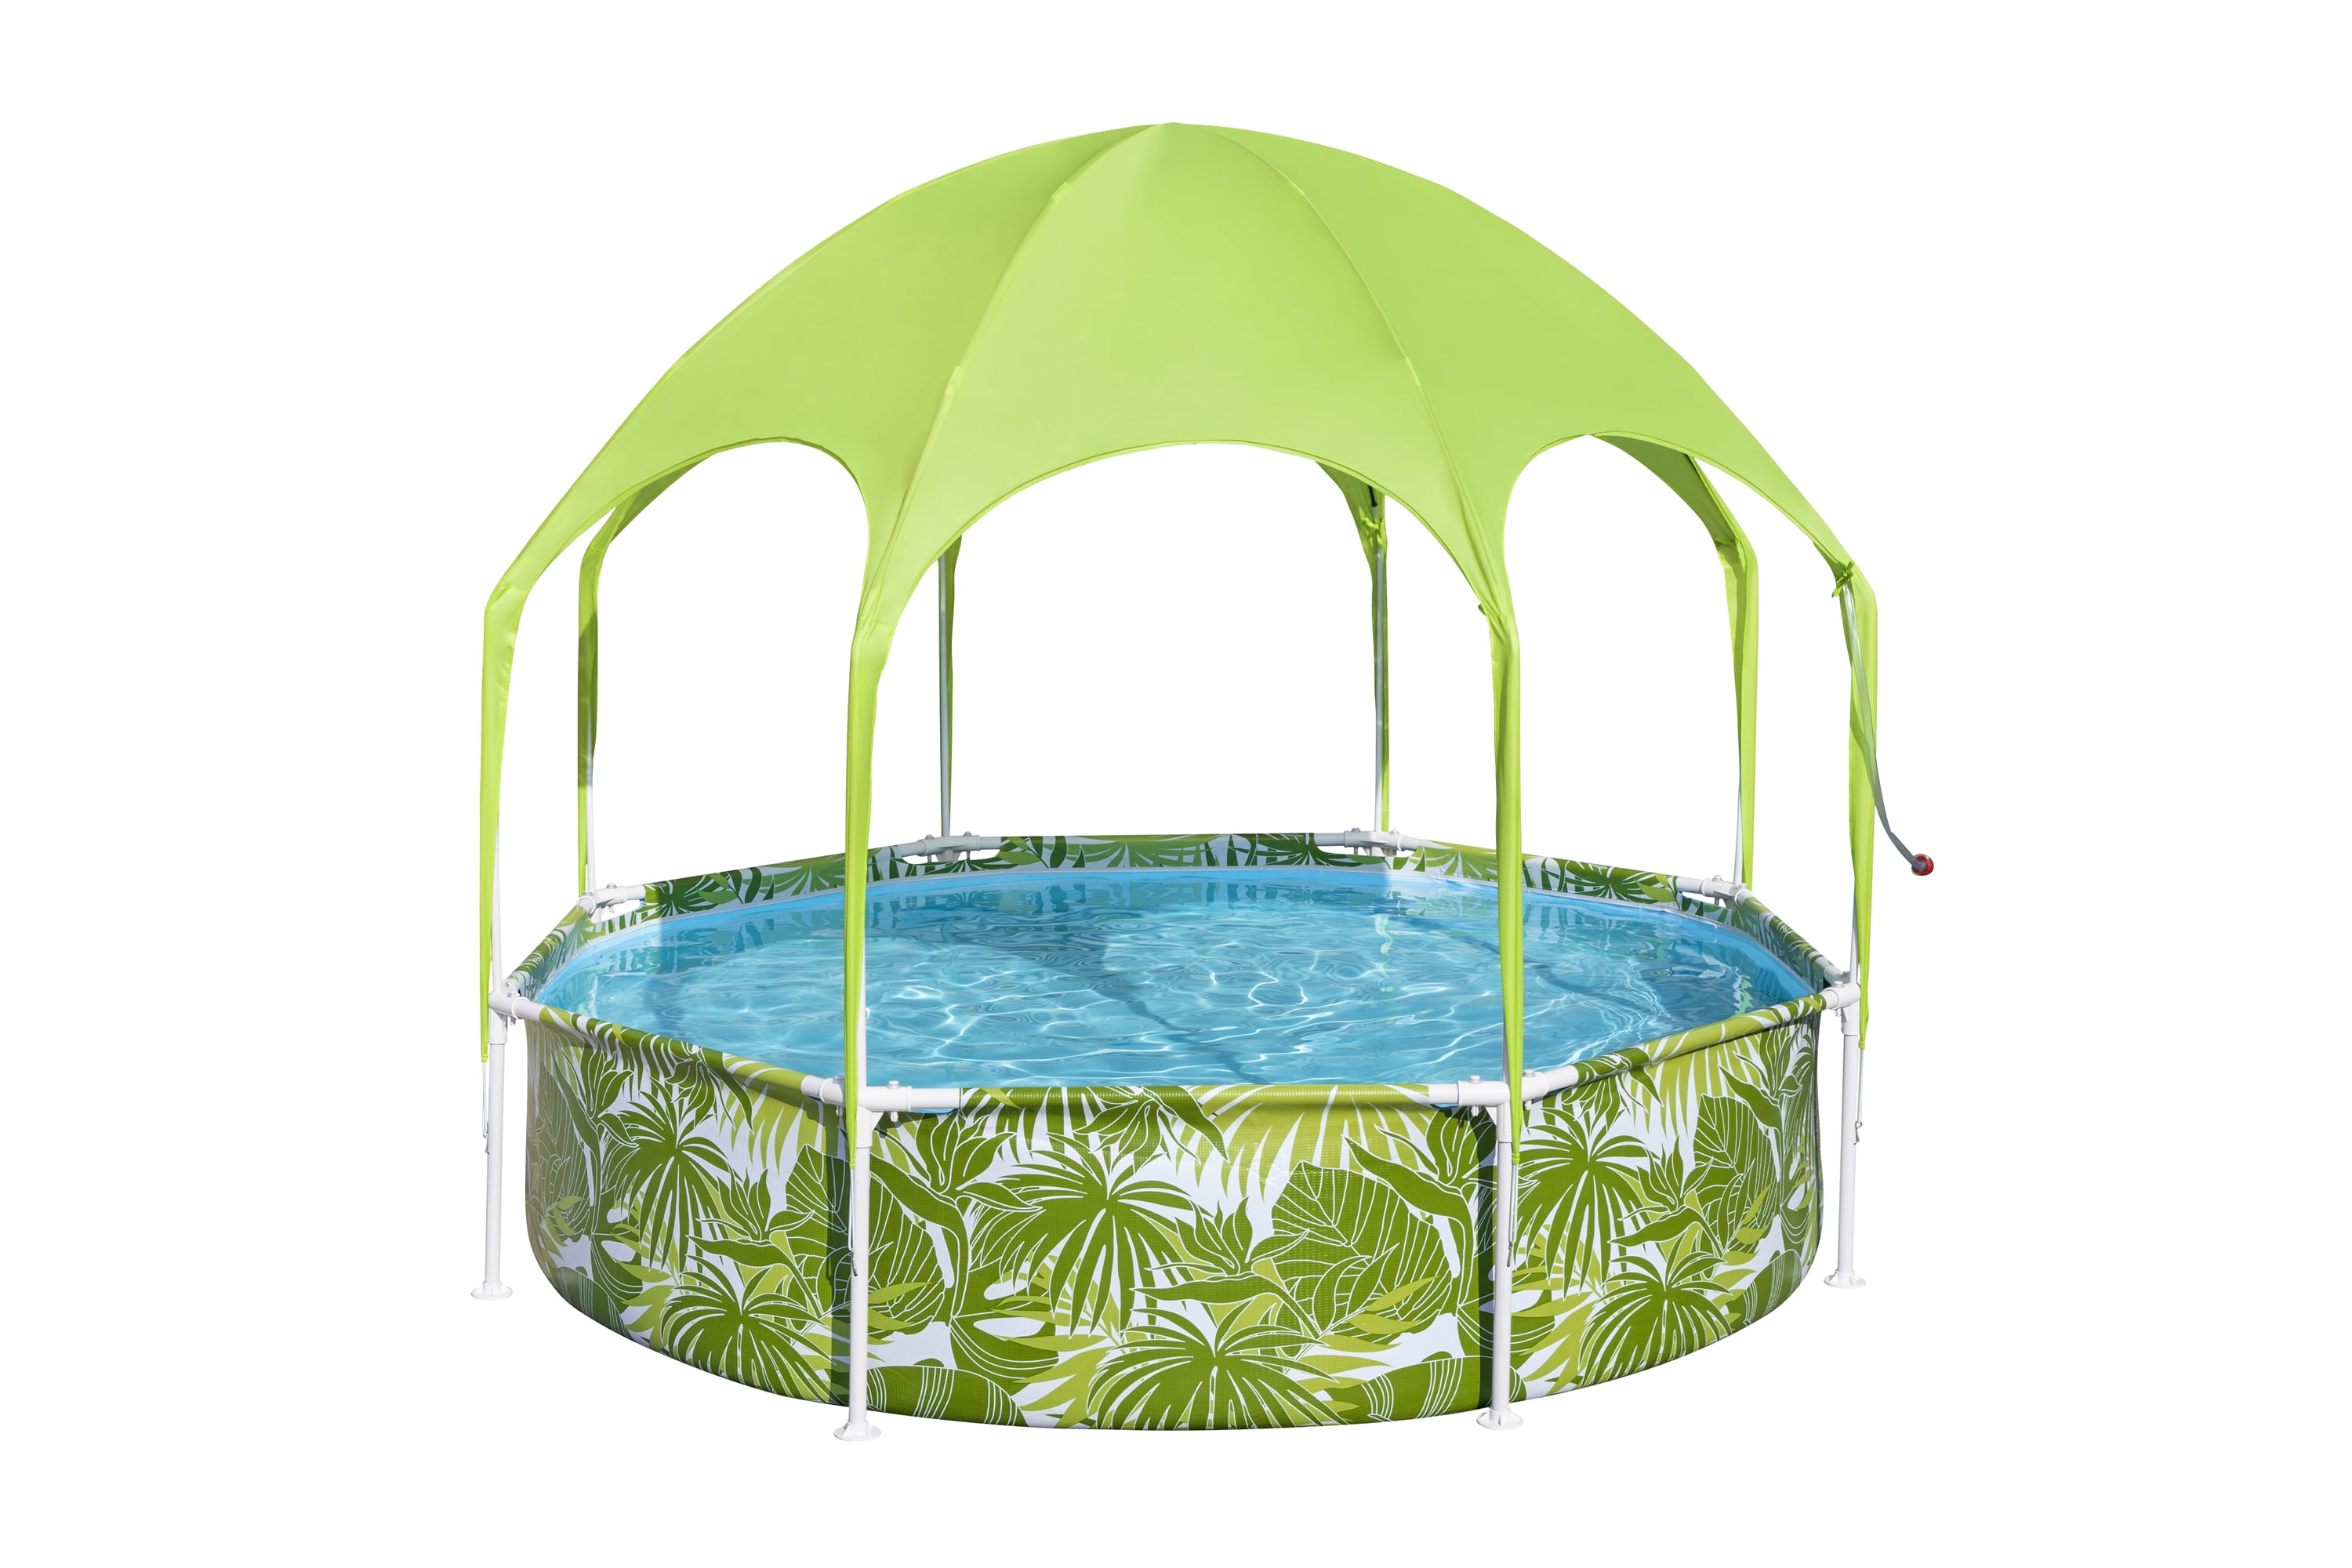 8' x 20" Bestway H2OGO Round Above Ground Pool Set W/ Shade & Cooling Mister $98 + Free Shipping